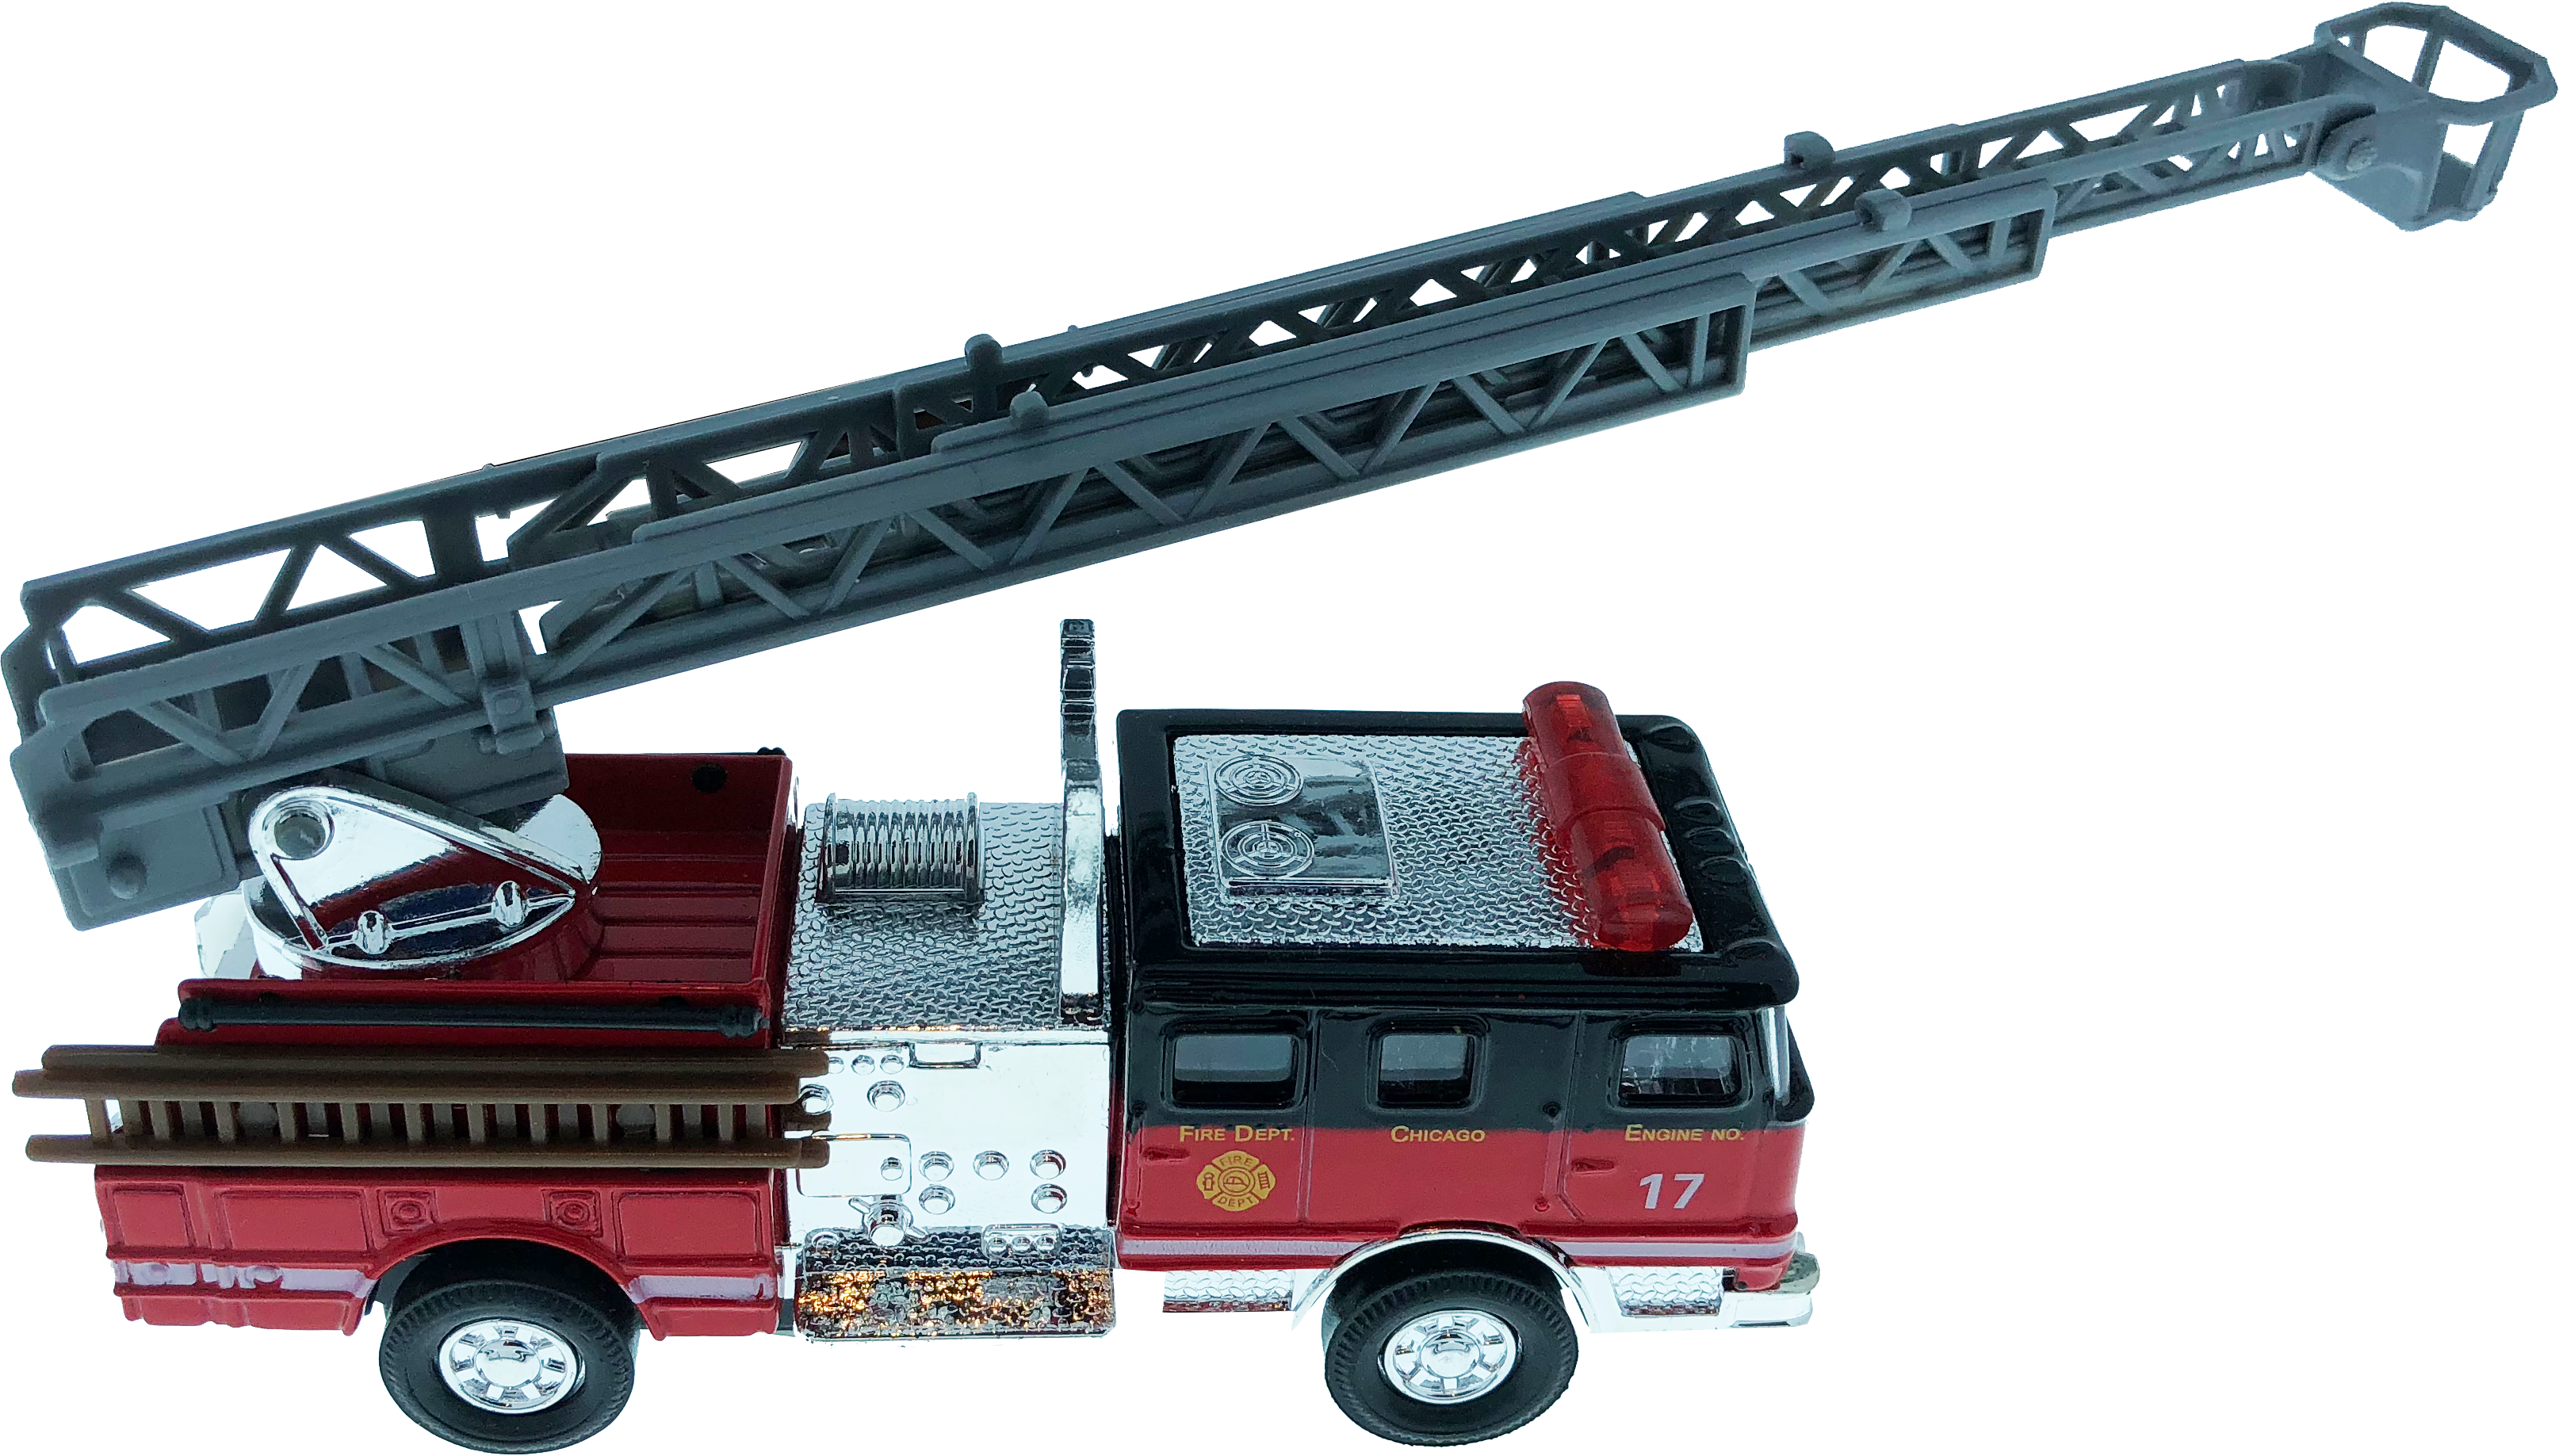 A Toy Fire Truck With A Ladder